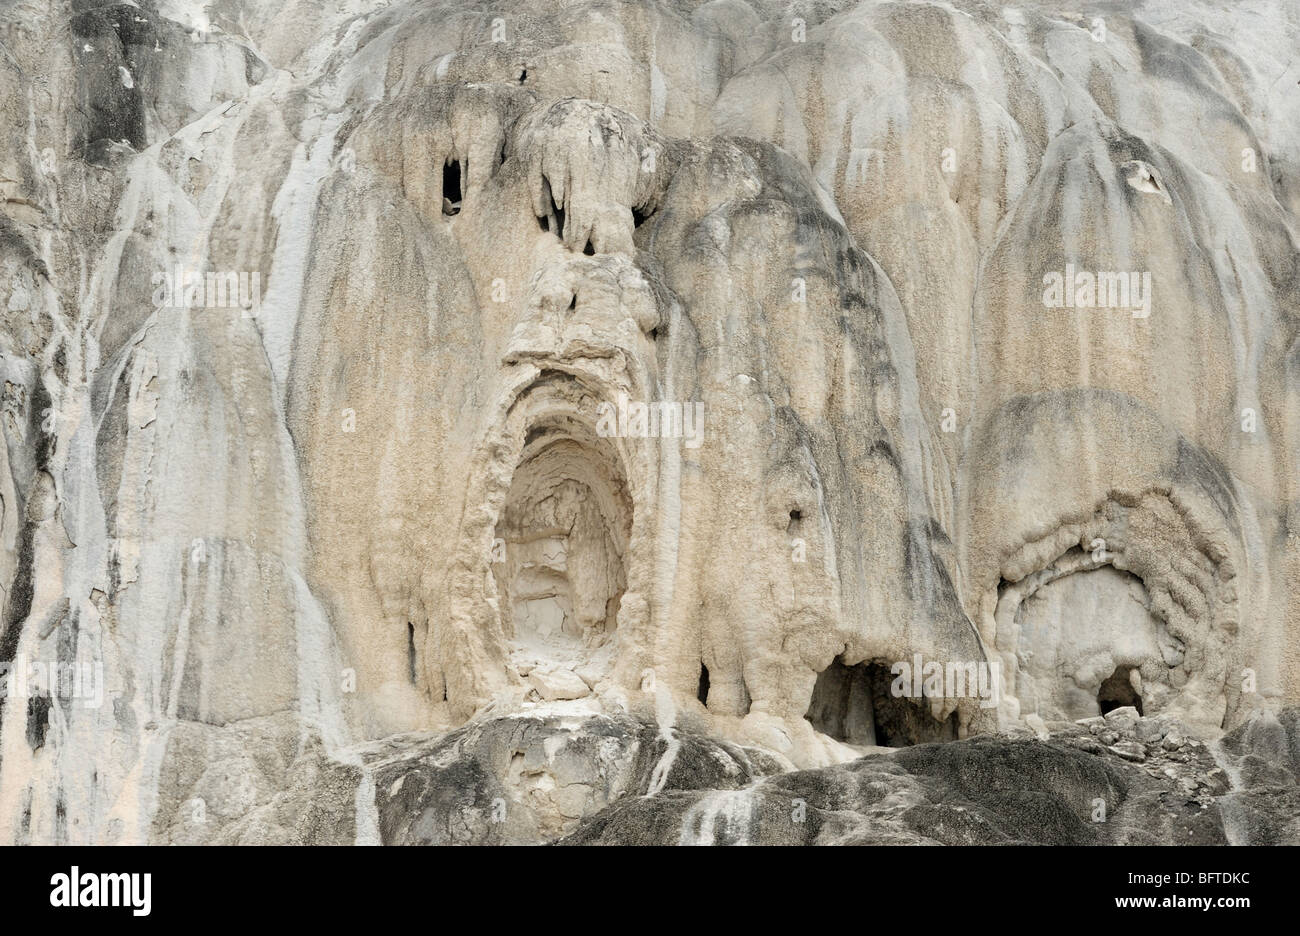 Travertine formations at Mound Terrace, Yellowstone National Park, Wyoming, USA Stock Photo